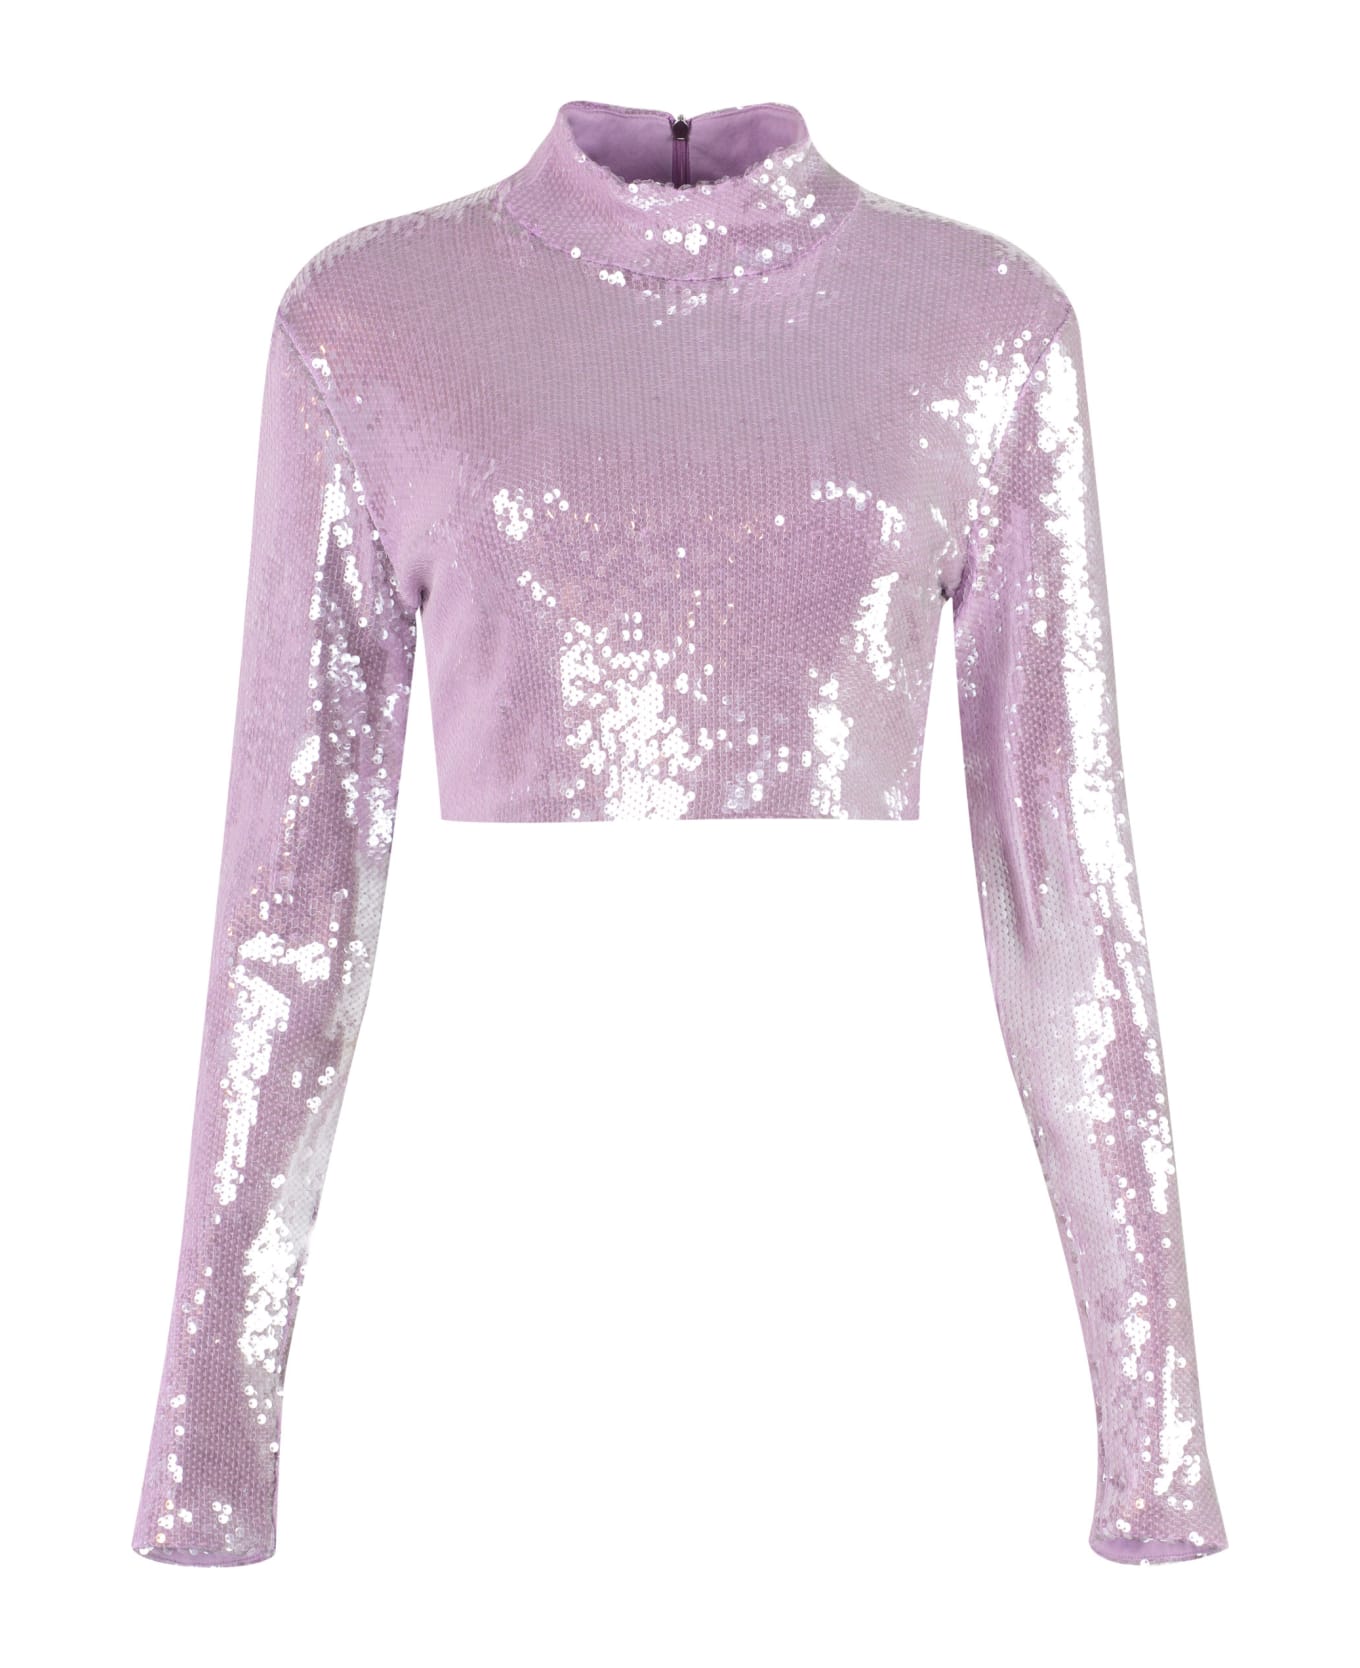 Rotate by Birger Christensen Long Sleeve Sequin Top - Lilac